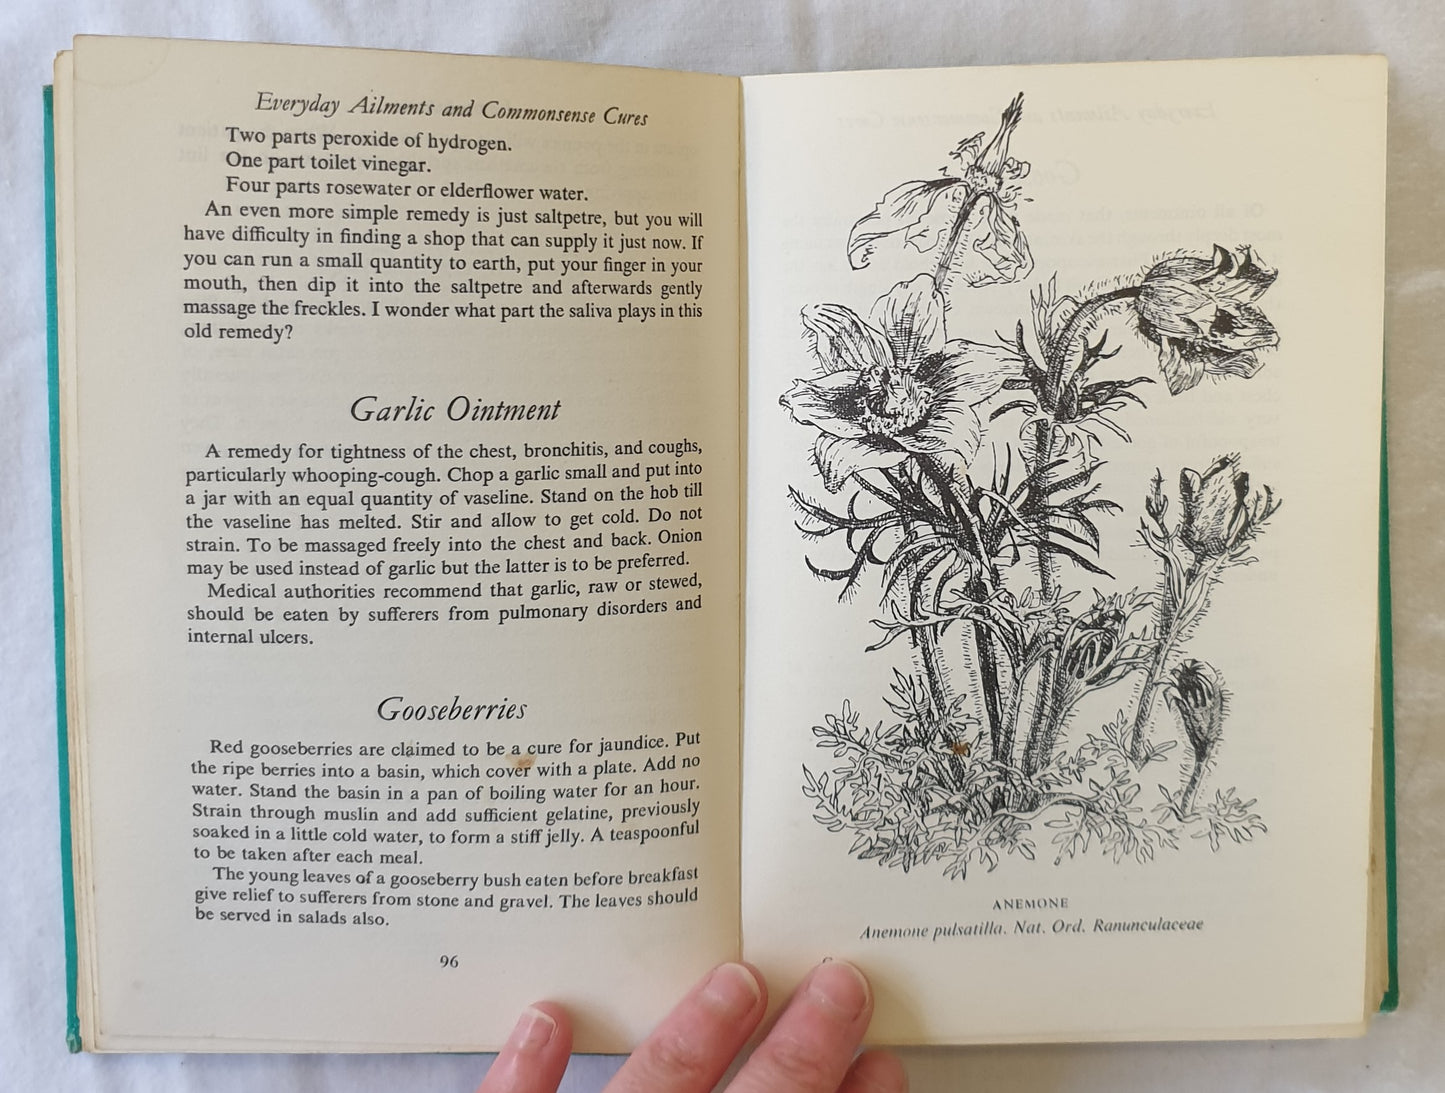 Herbal Remedies by Mary Thorne Quelch